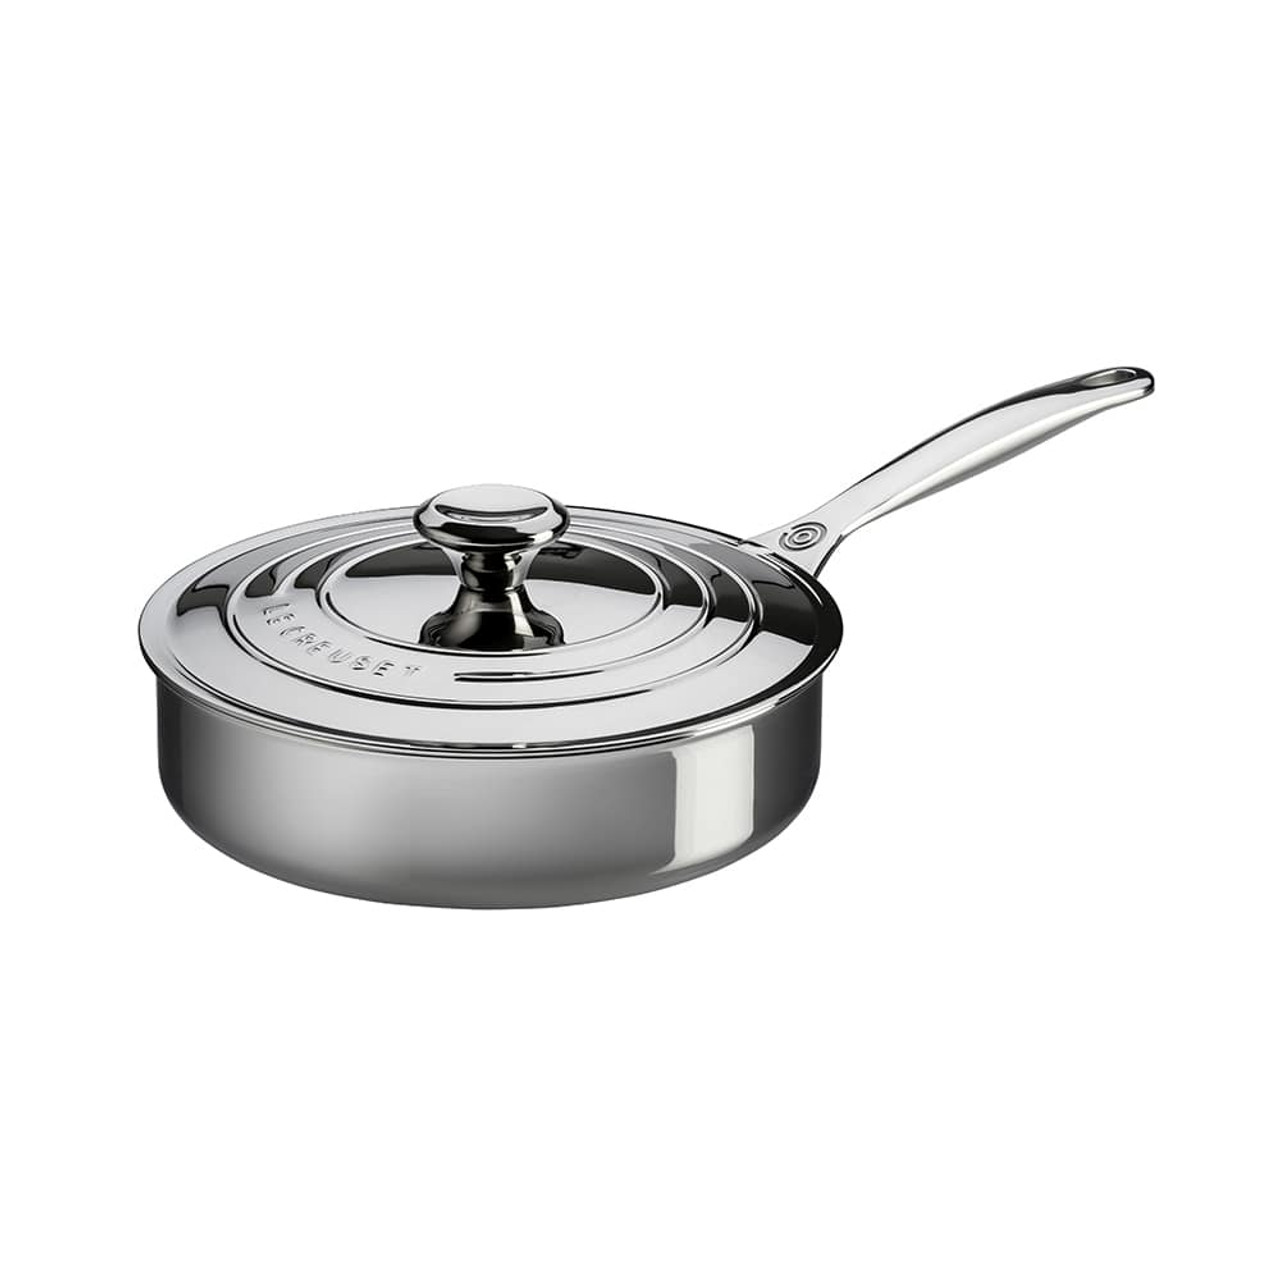 https://cdn11.bigcommerce.com/s-hccytny0od/images/stencil/1280x1280/products/871/1407/le-creuset-stainless-steel-saute-pan-3qt__87859.1586478655.jpg?c=2?imbypass=on